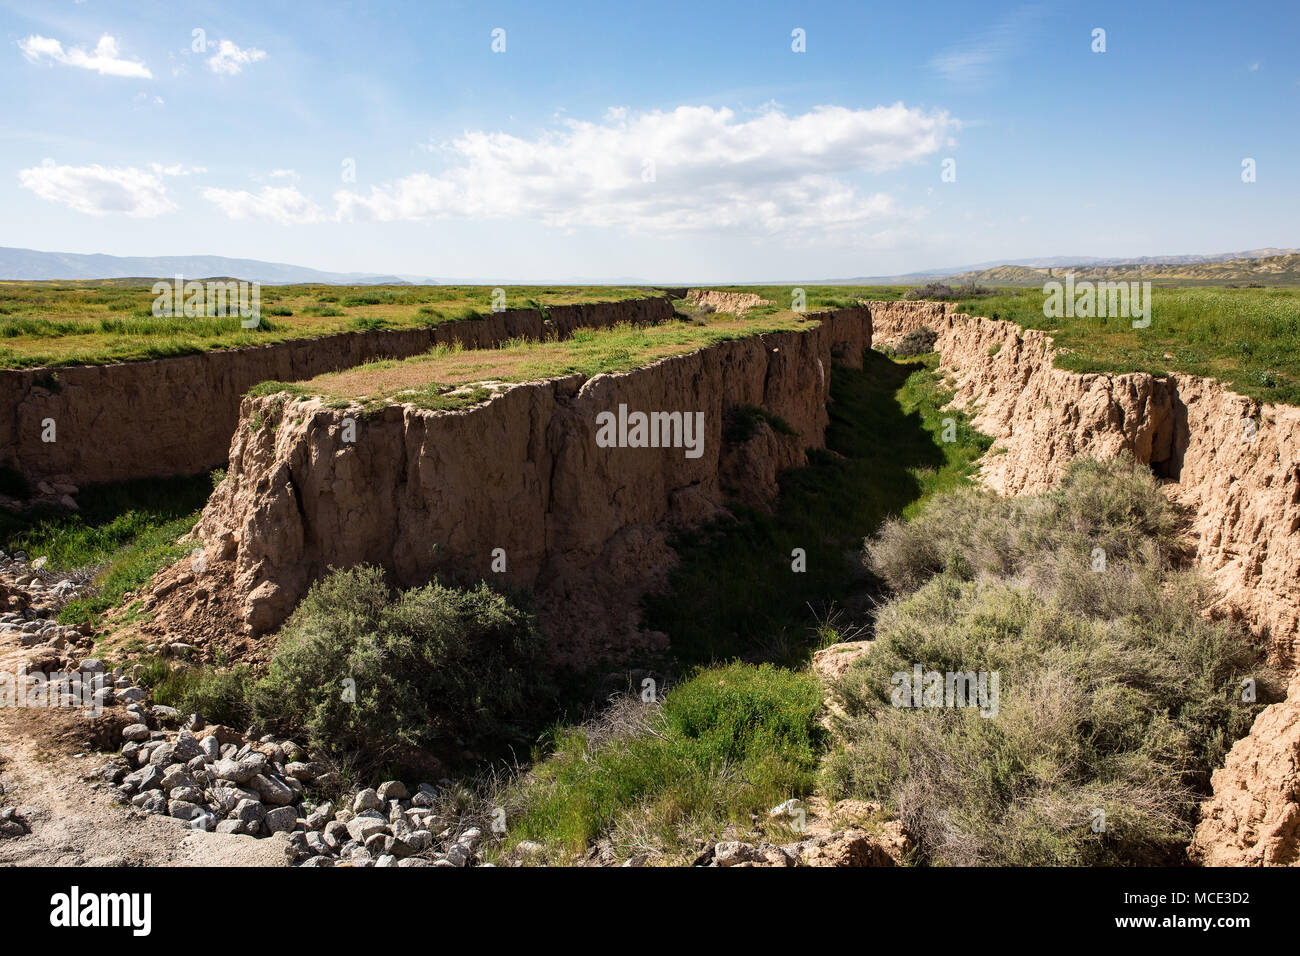 San Andreas Fault Line at the Carrizo Plain National Monument Stock Photo